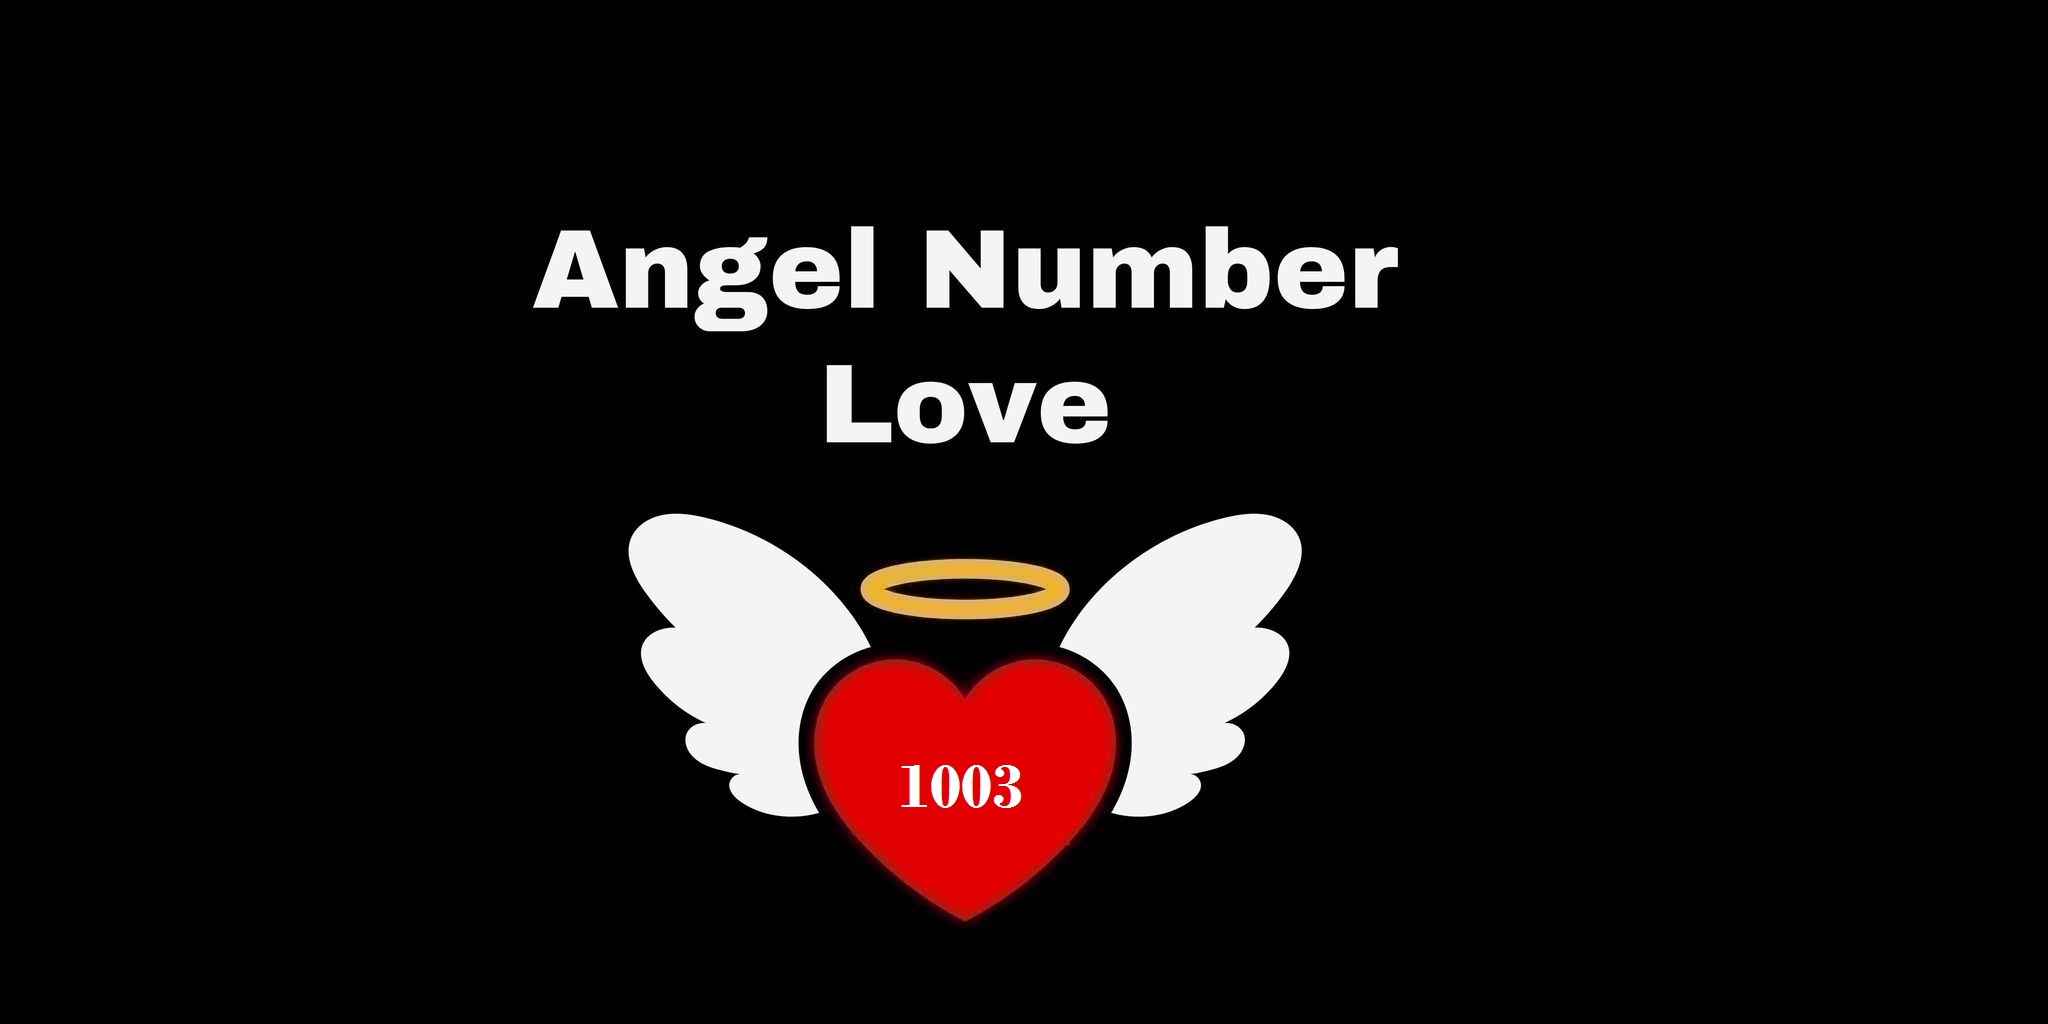 1003 Angel Number Meaning In Love